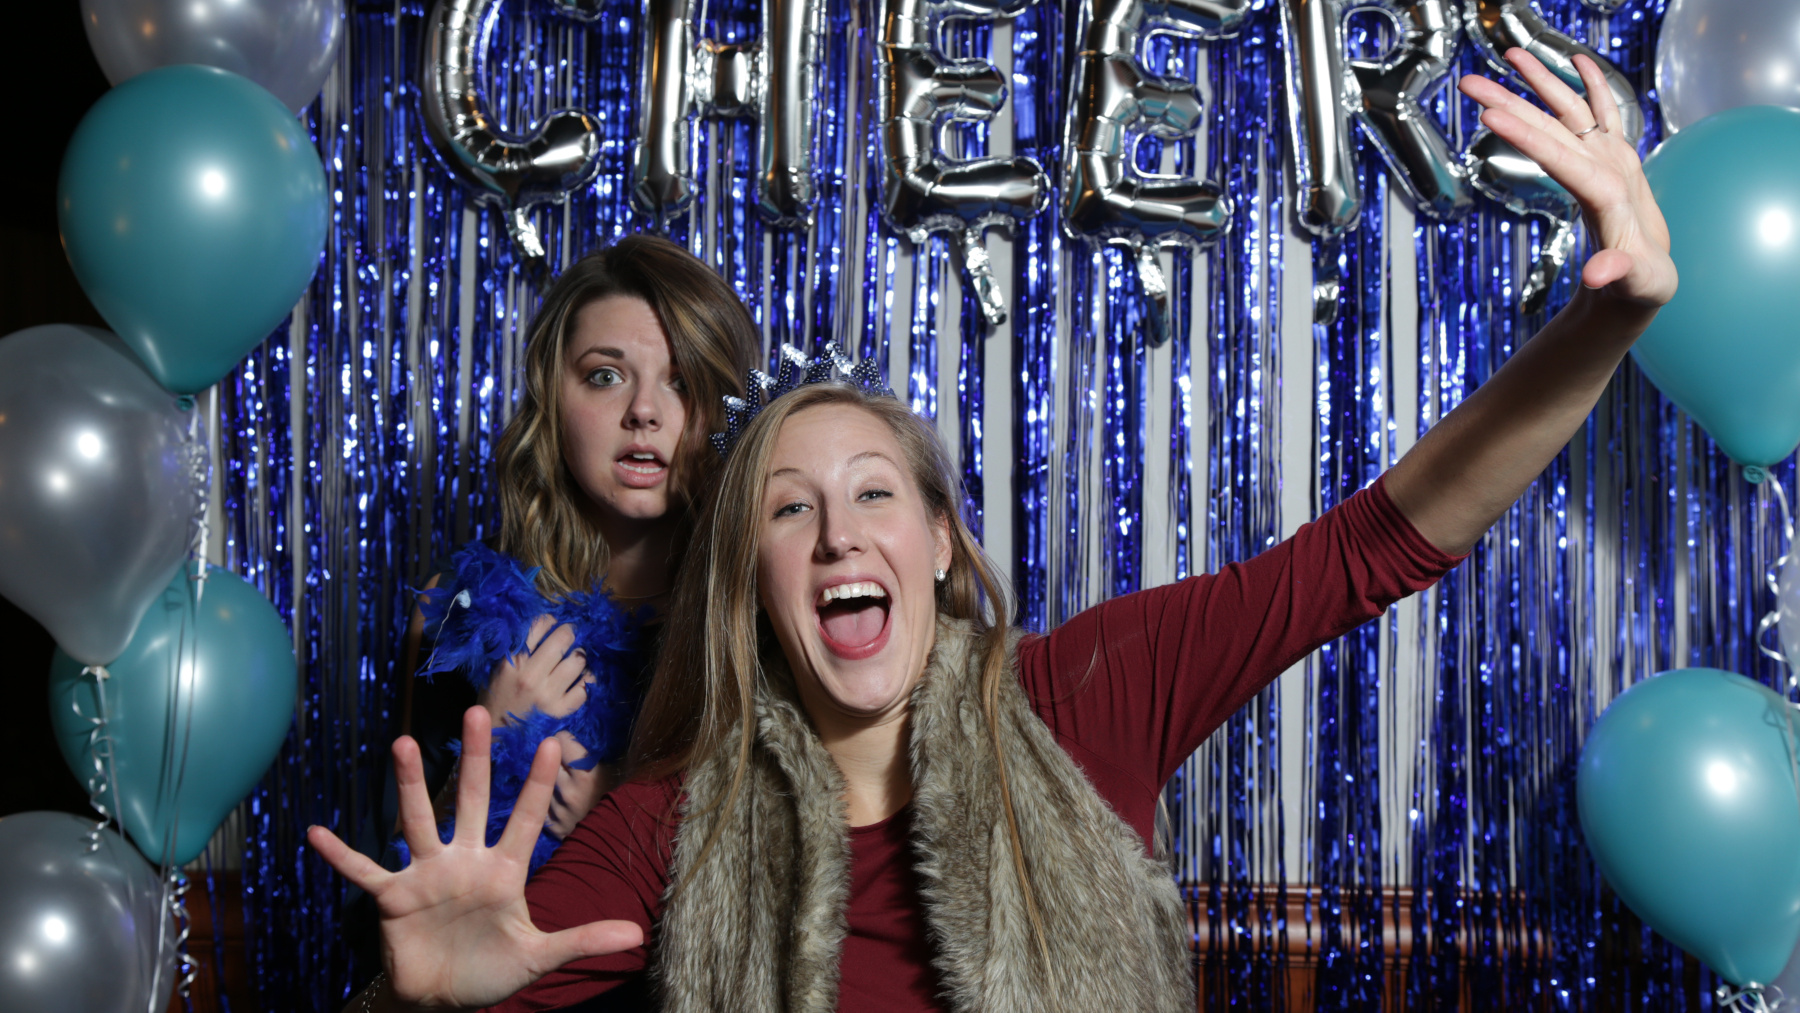 Festival supporters Debralyn Lazarescu (left) and Hannah Chargin (right) in the photo booth at the Cheers to BWiFF 2017 Fundraiser in Palatine.